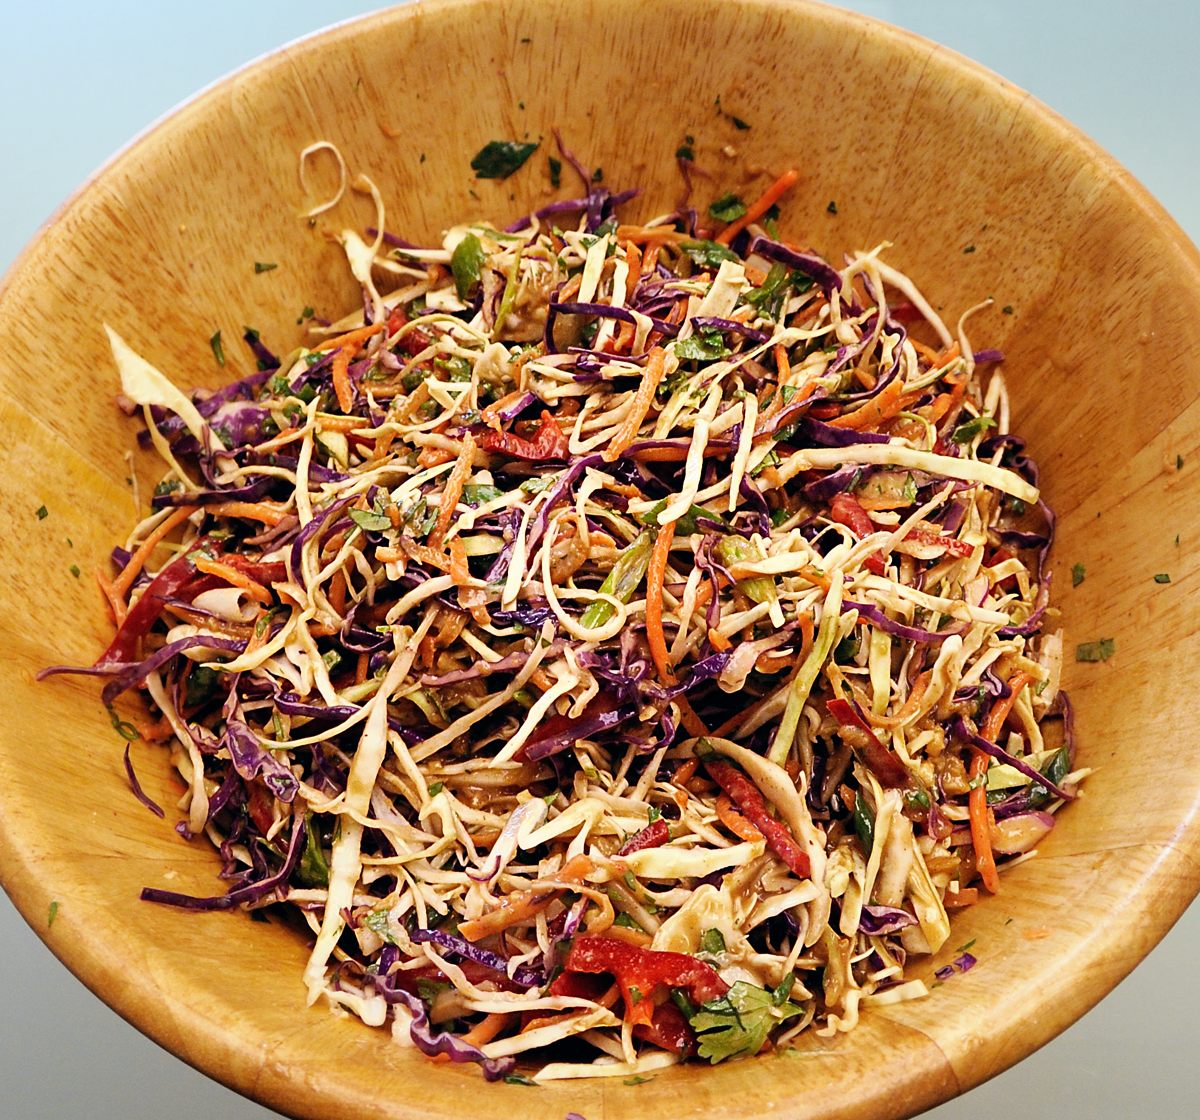 Asian coleslaw with Peanut Dressing, Wooden Bowl